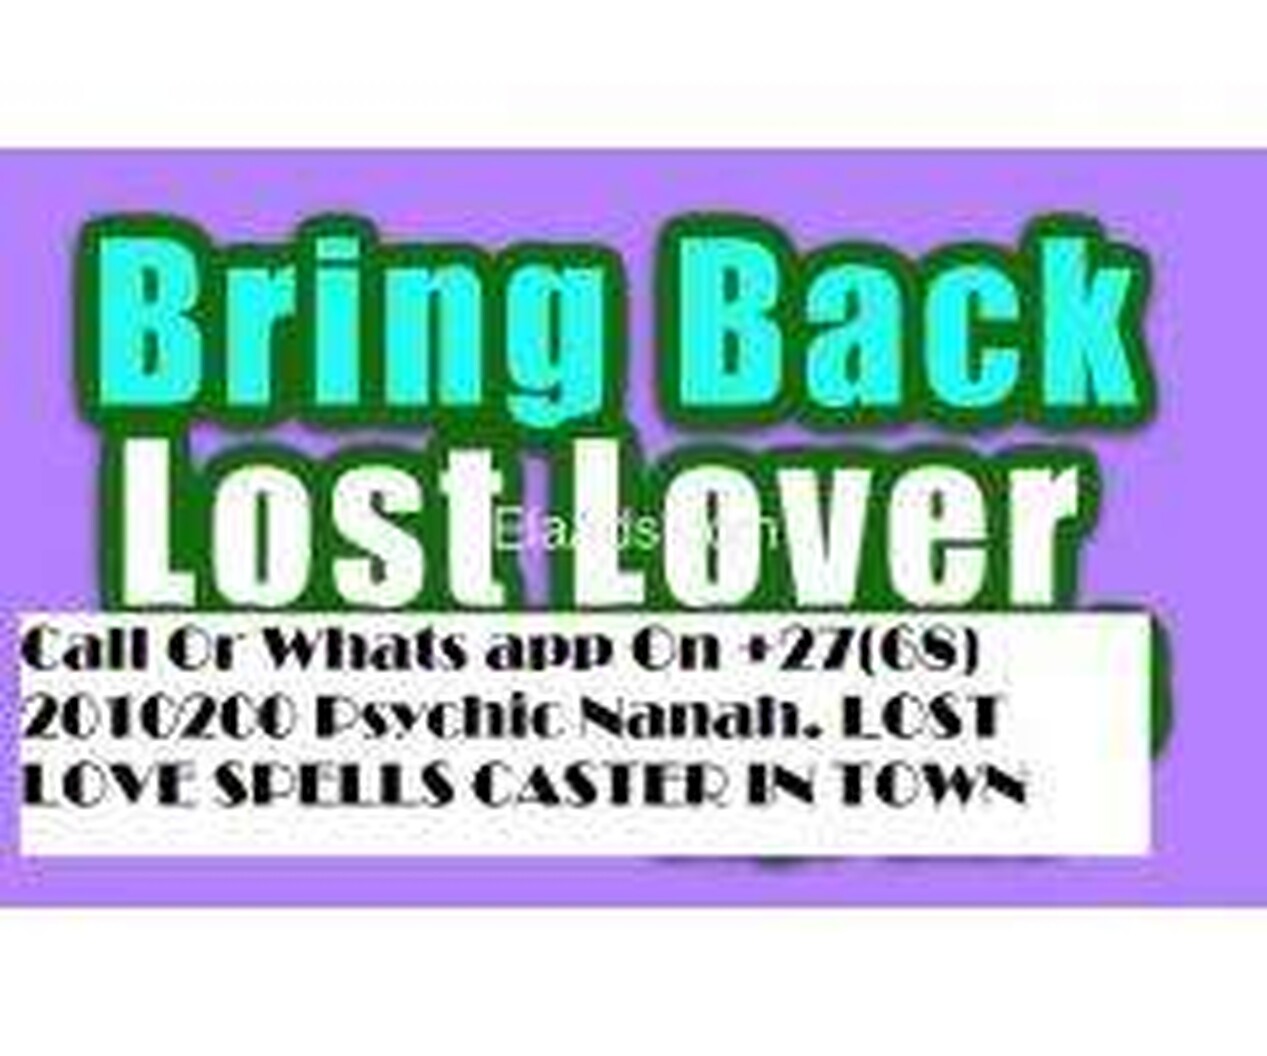 Candles Love spell to bring back lost lover Contact Us On +27631229624 Guaranteed Lost love spells IN Botswana-Lesotho-Canada-Namibia.